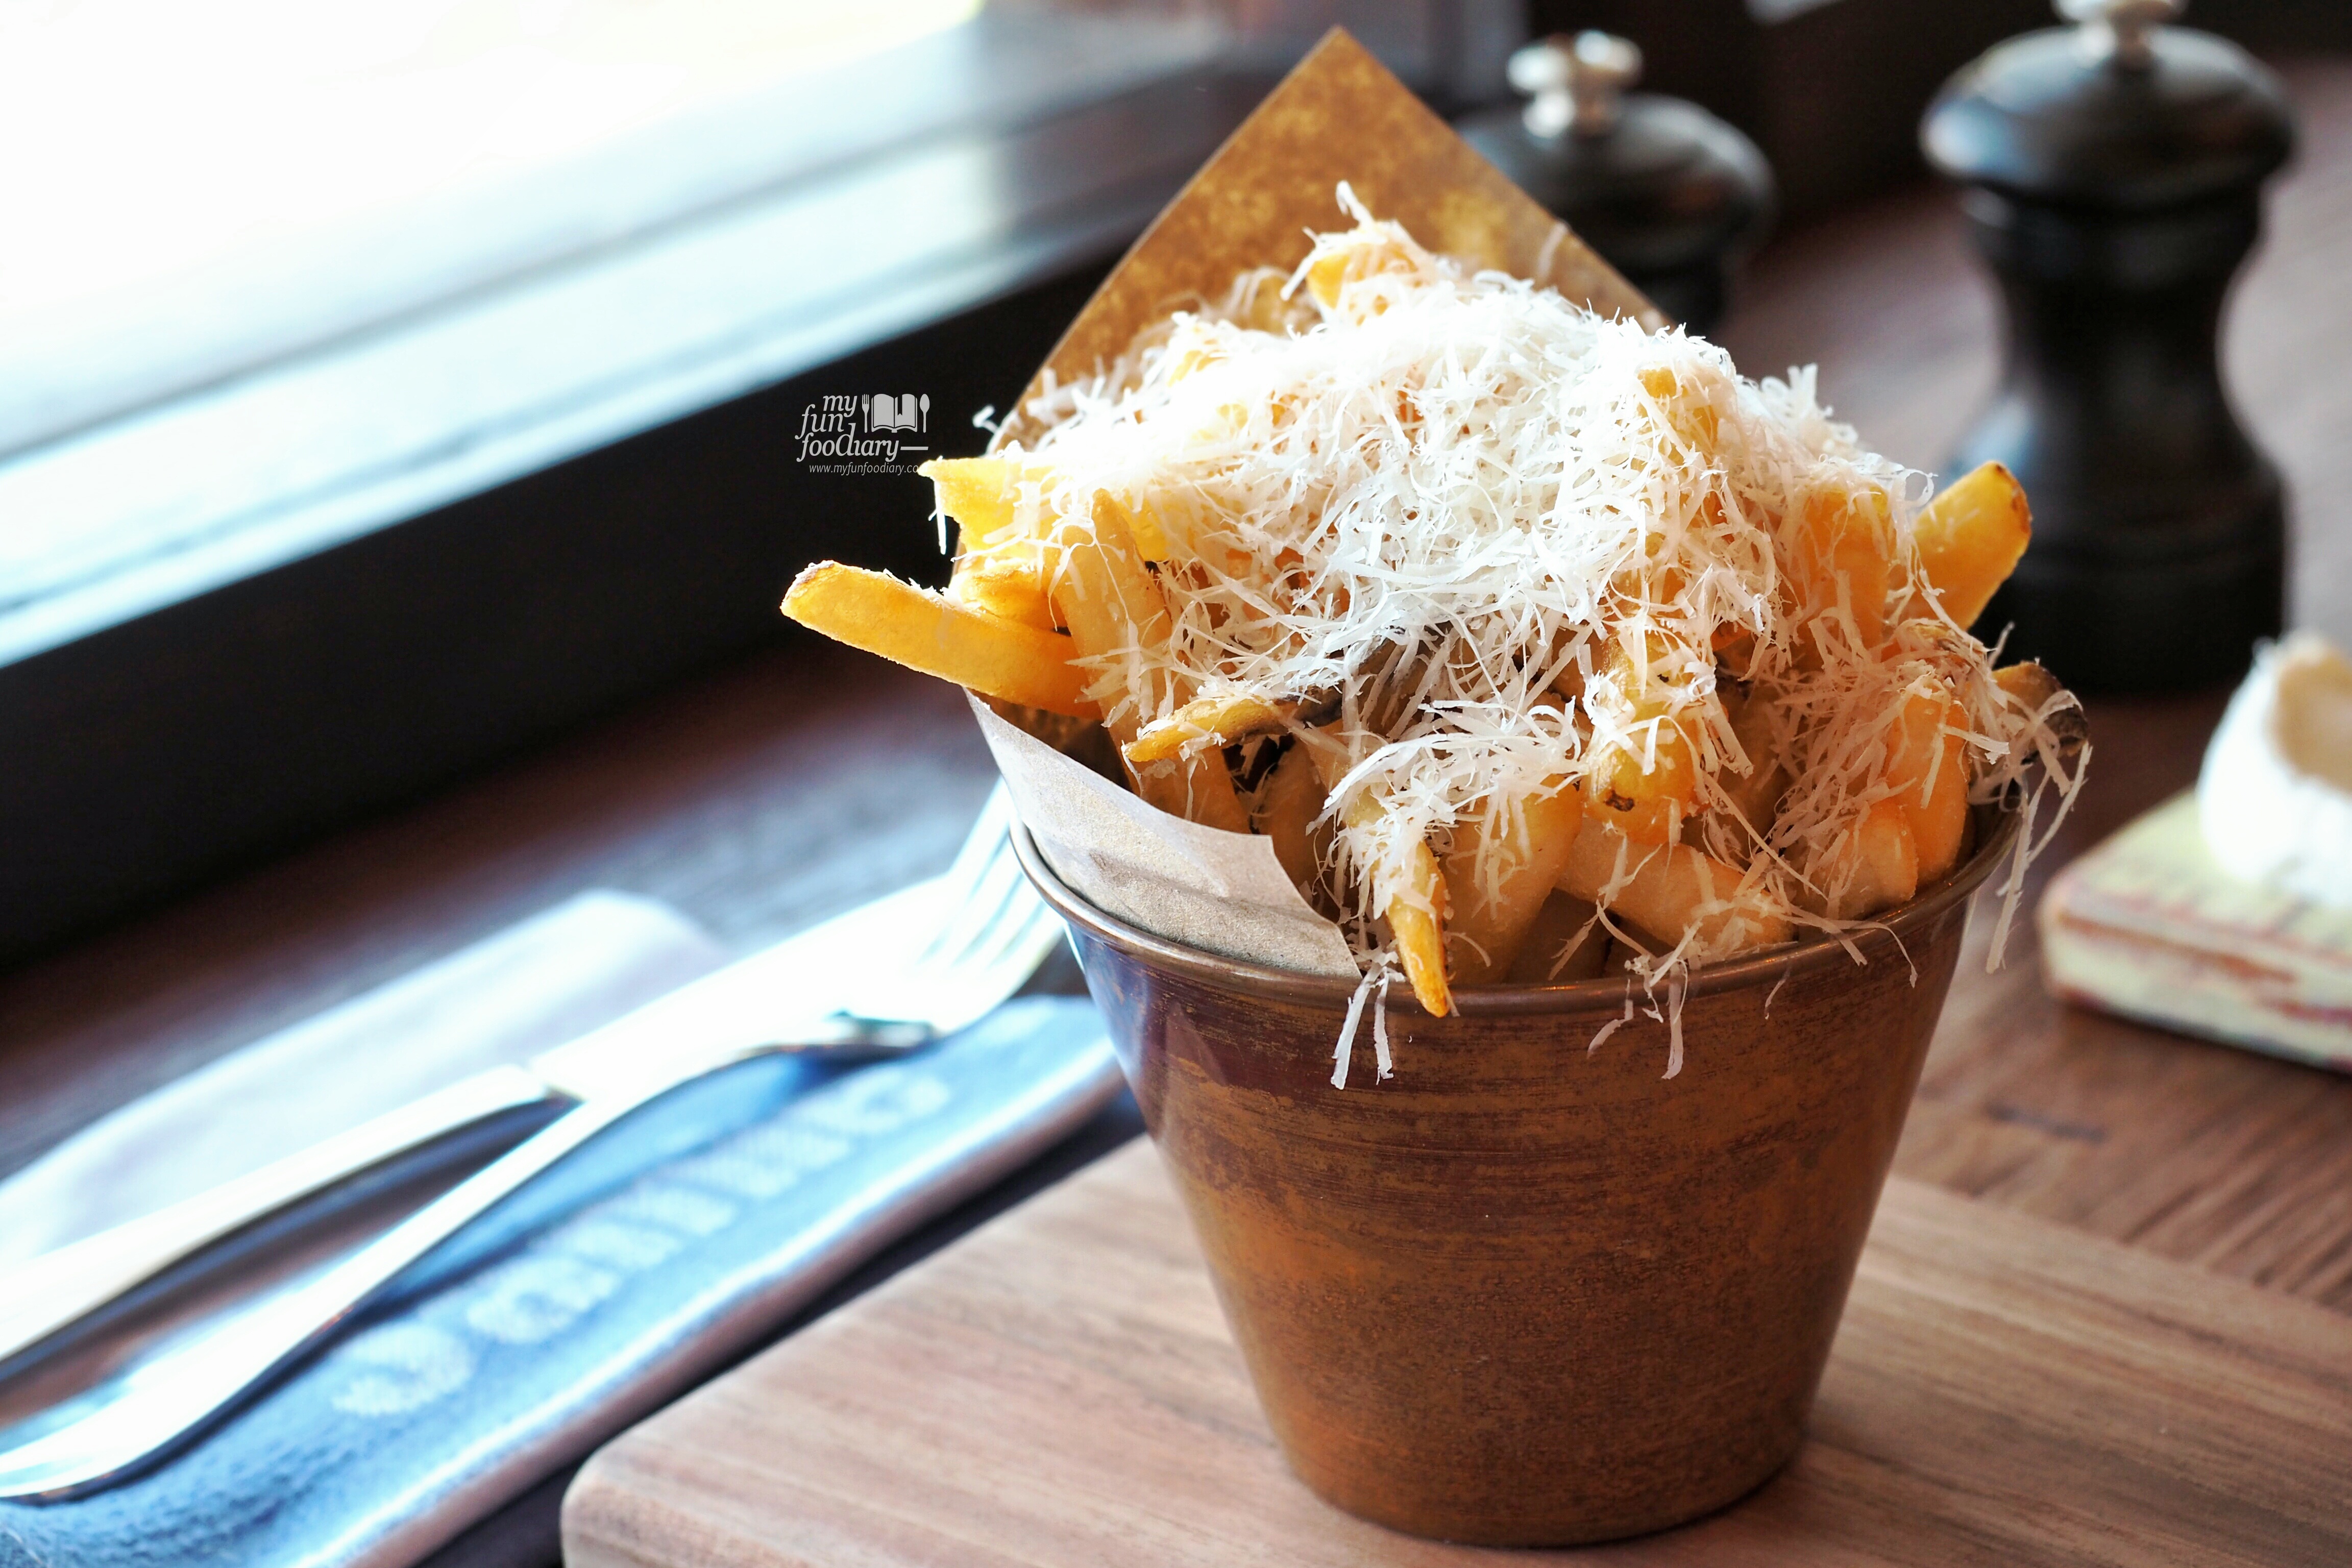 Posh Chips at Jamie's Oliver Bali by Myfunfoodiary